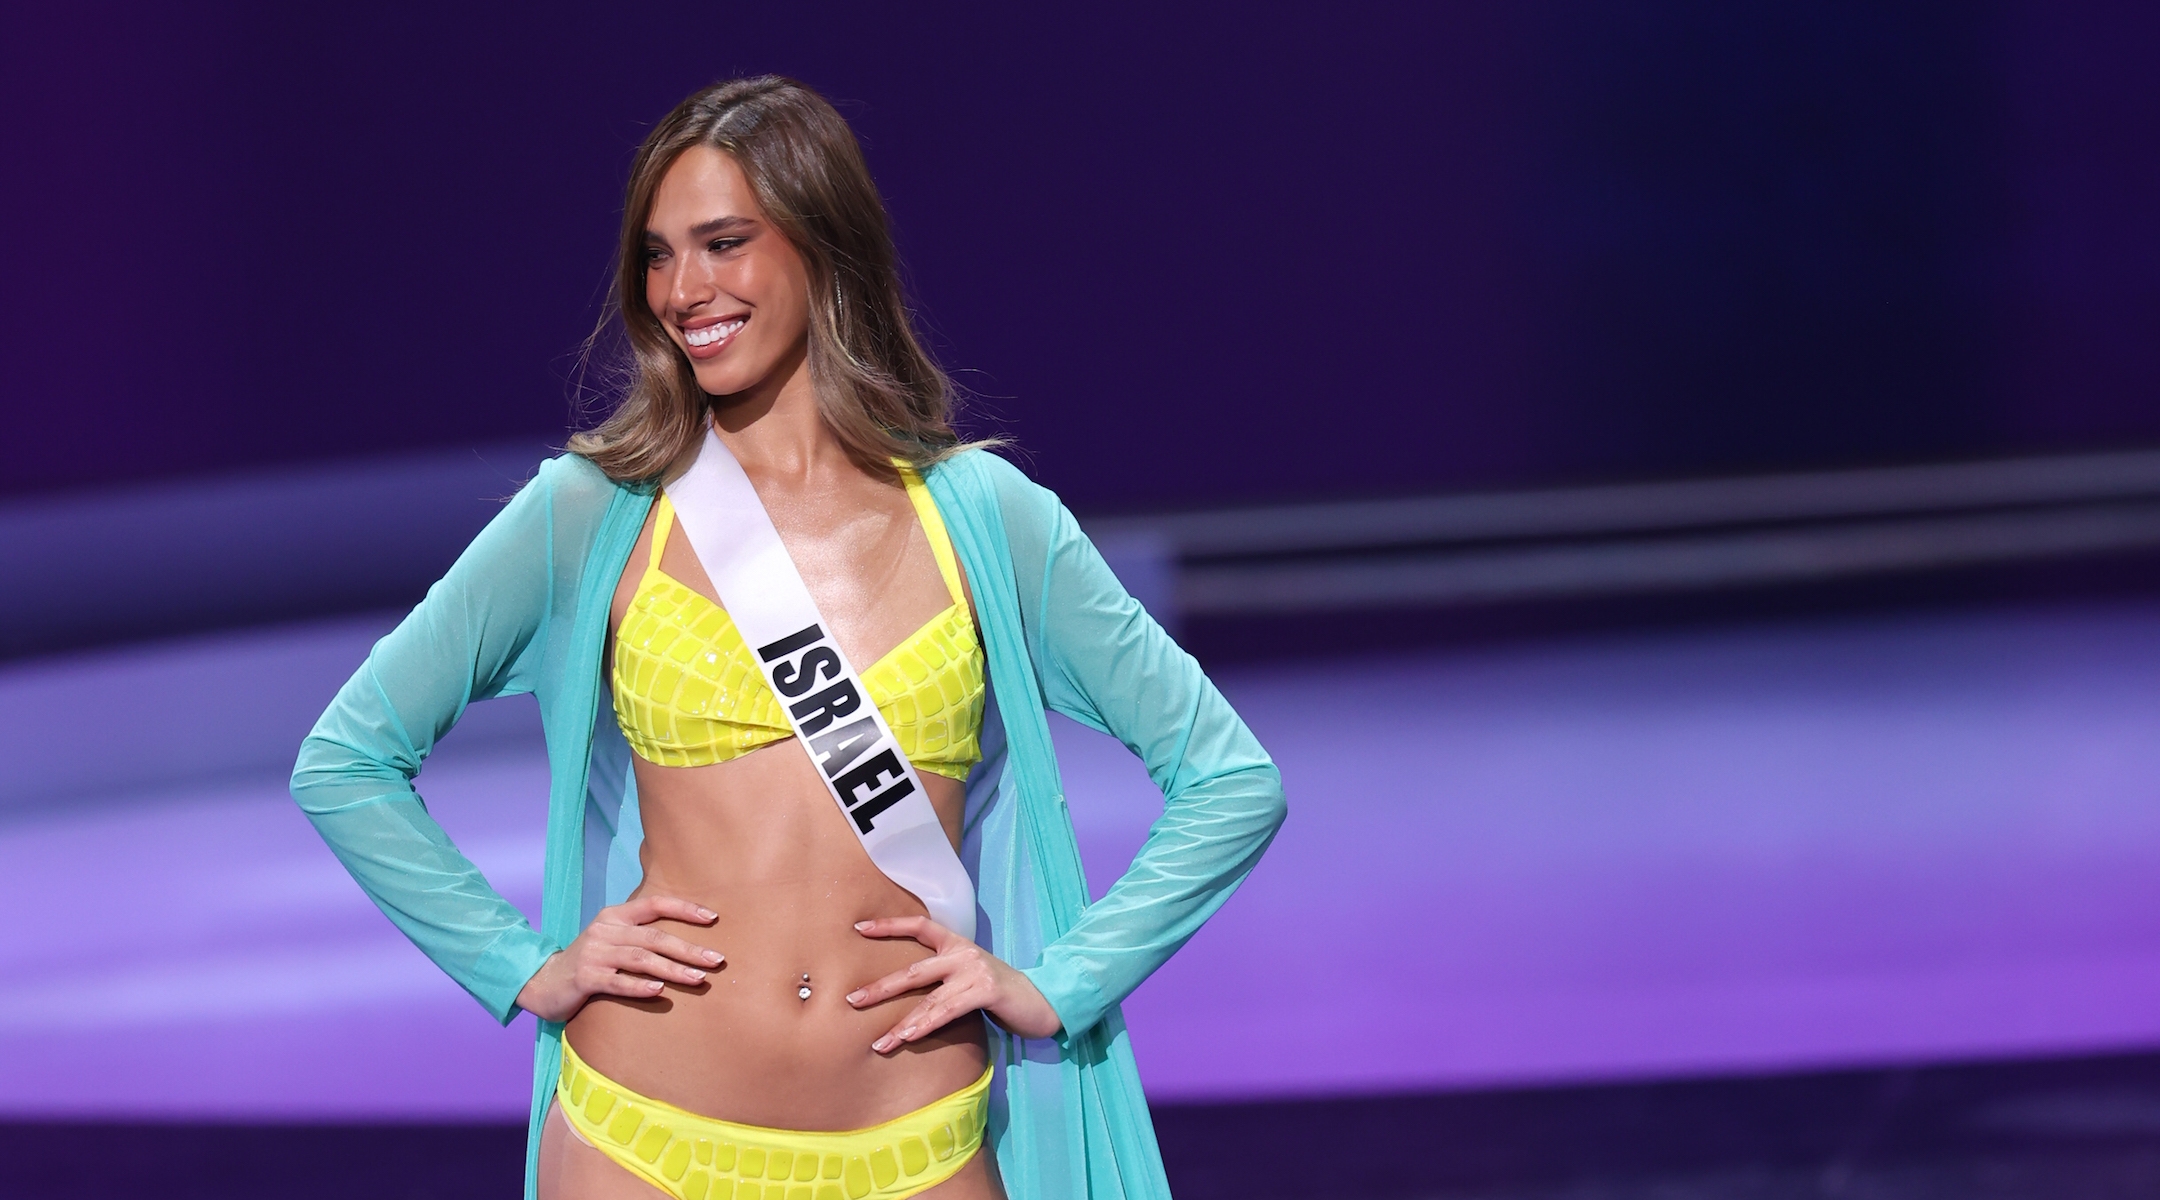 Israel selected to host Miss Universe pageant for the first time